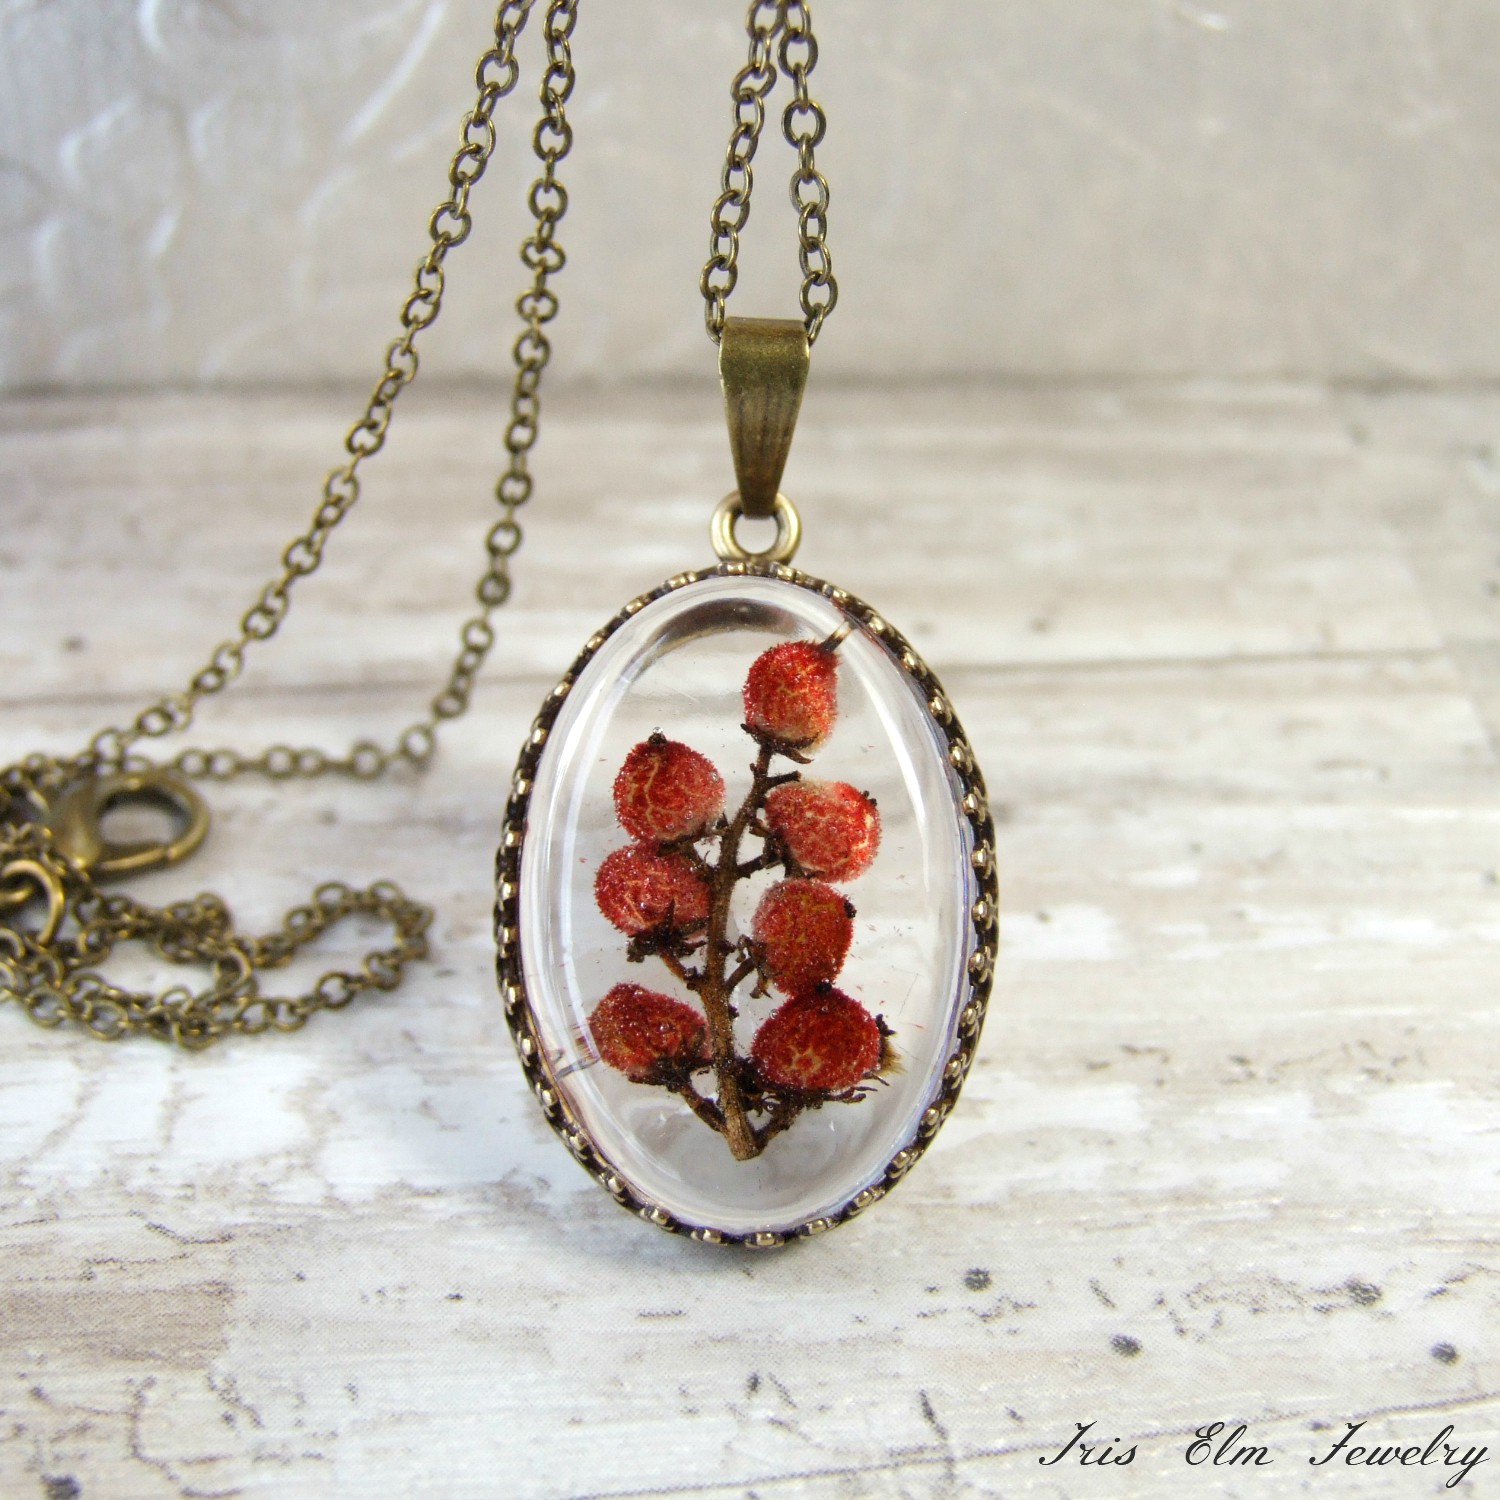 Red Sumac Berries Resin Pendant Necklace